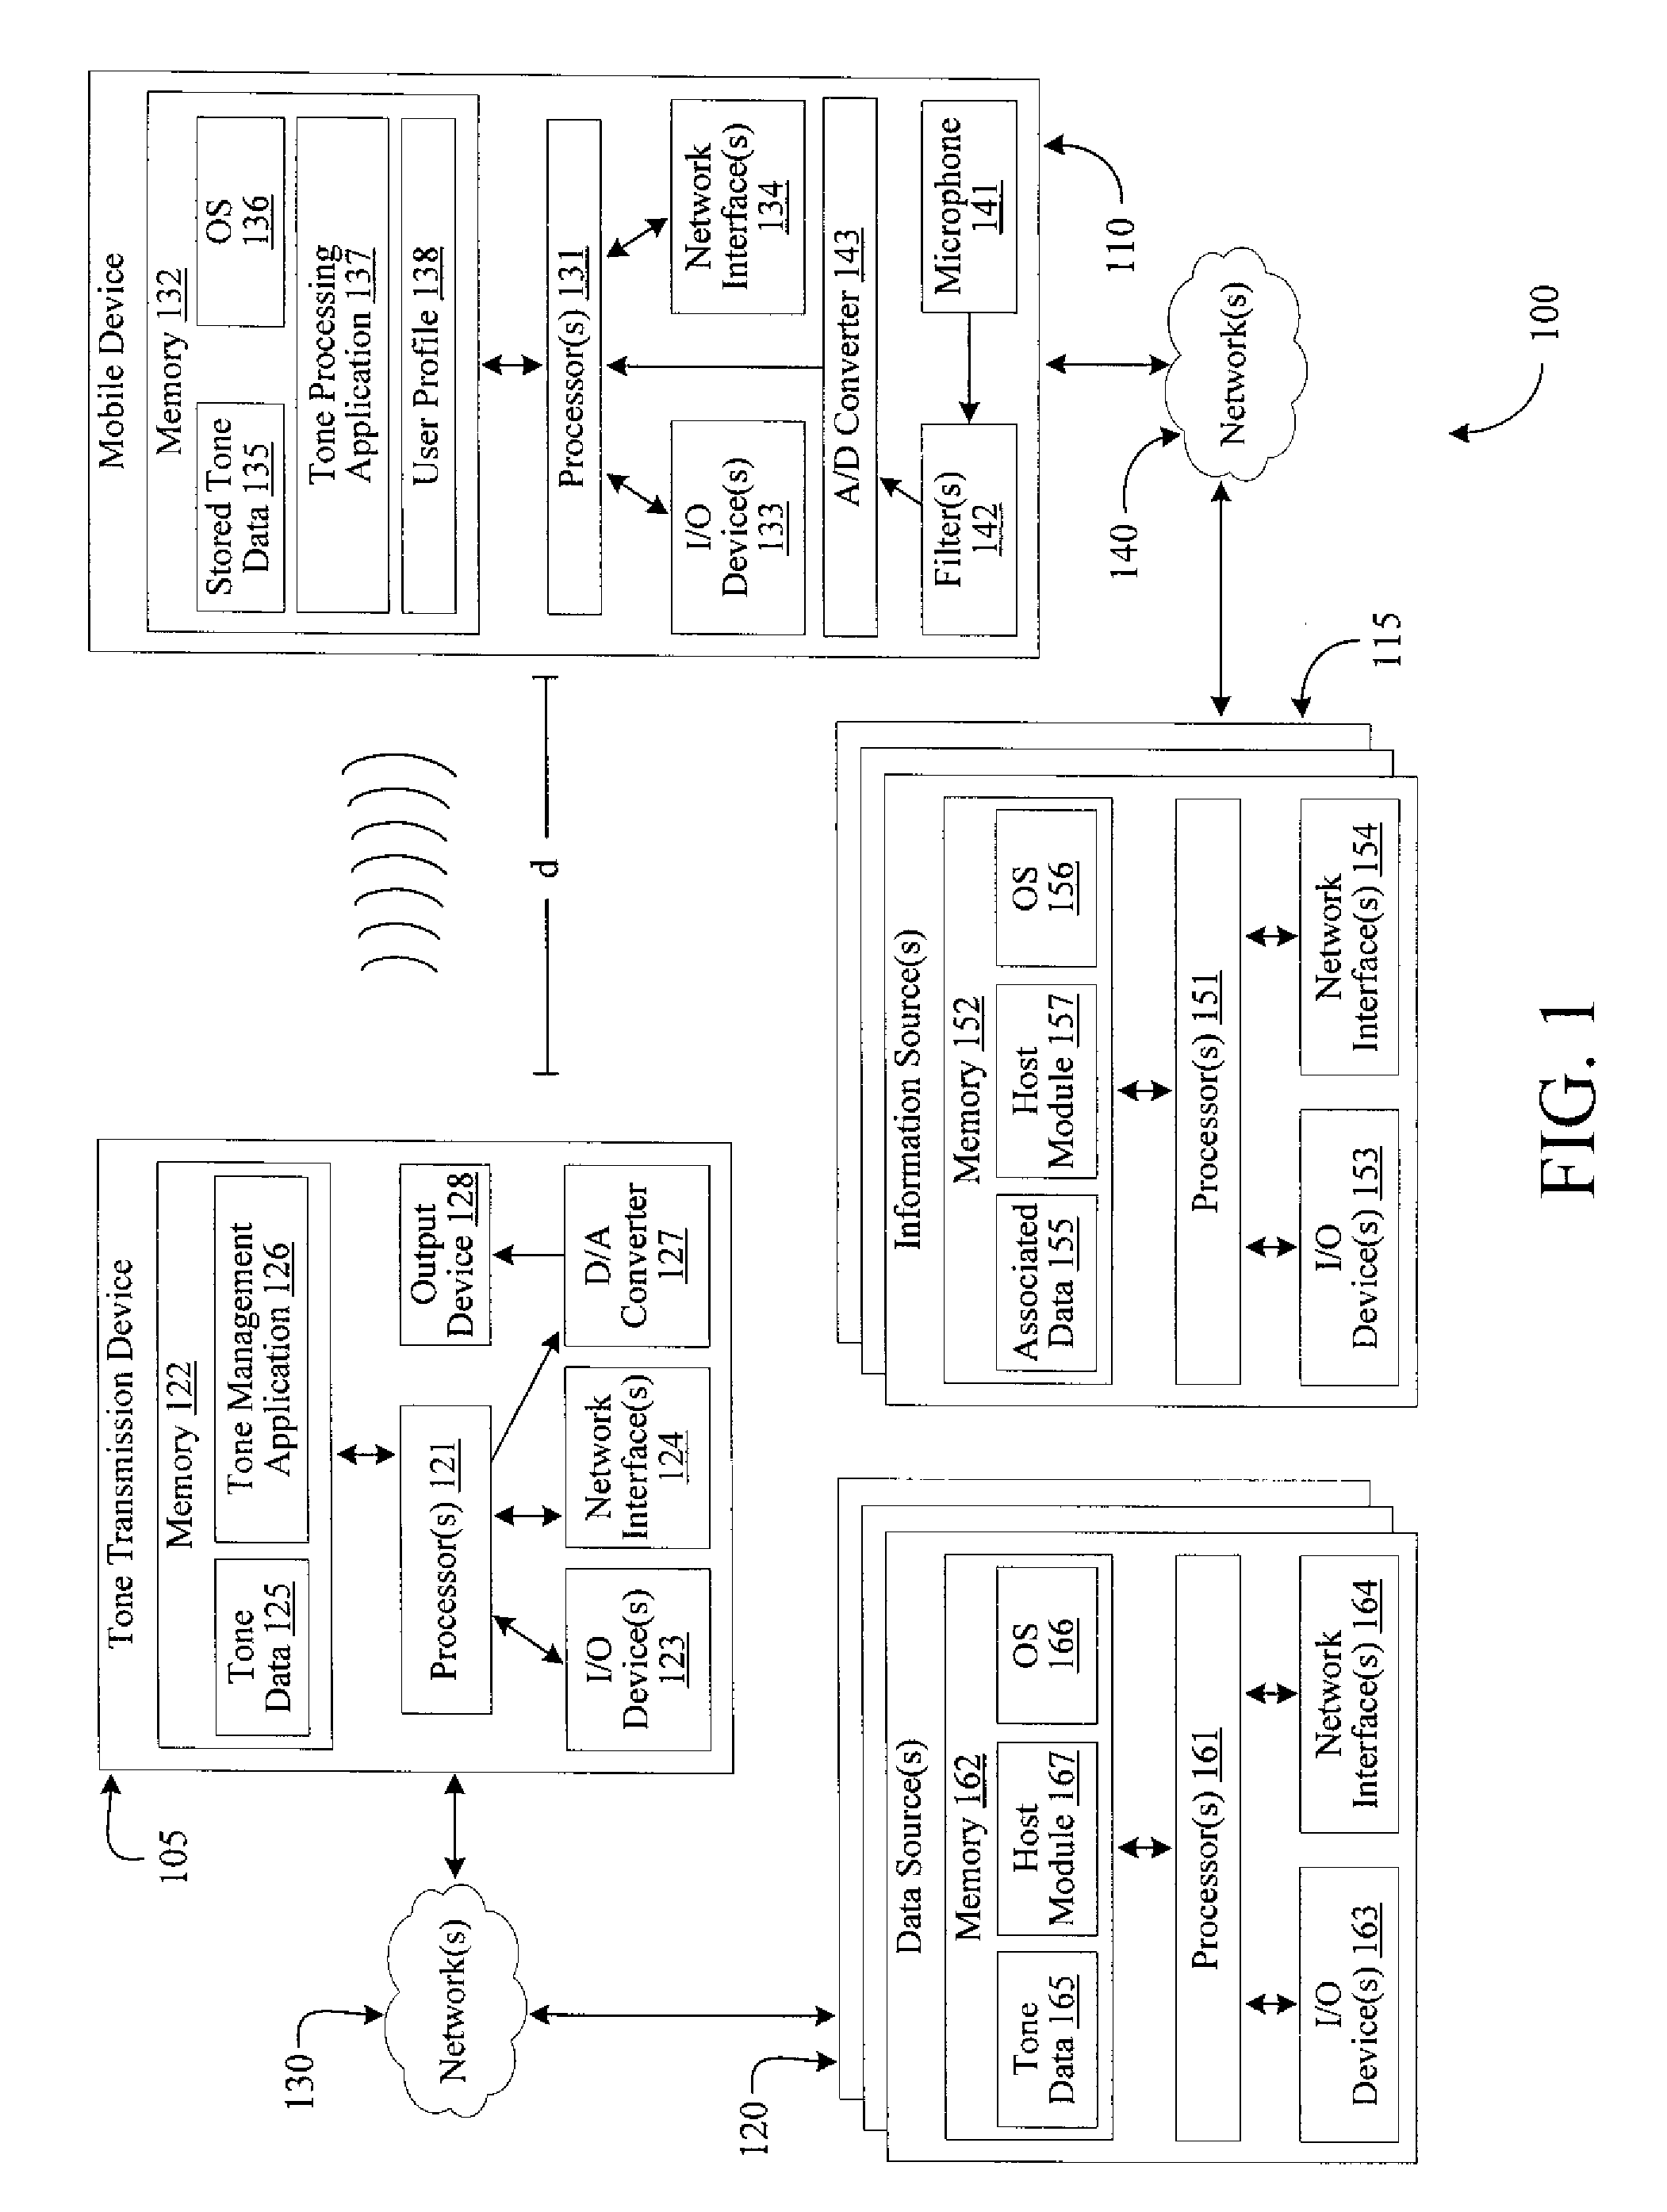 Systems, methods and apparatus for facilitating communication between mobile devices